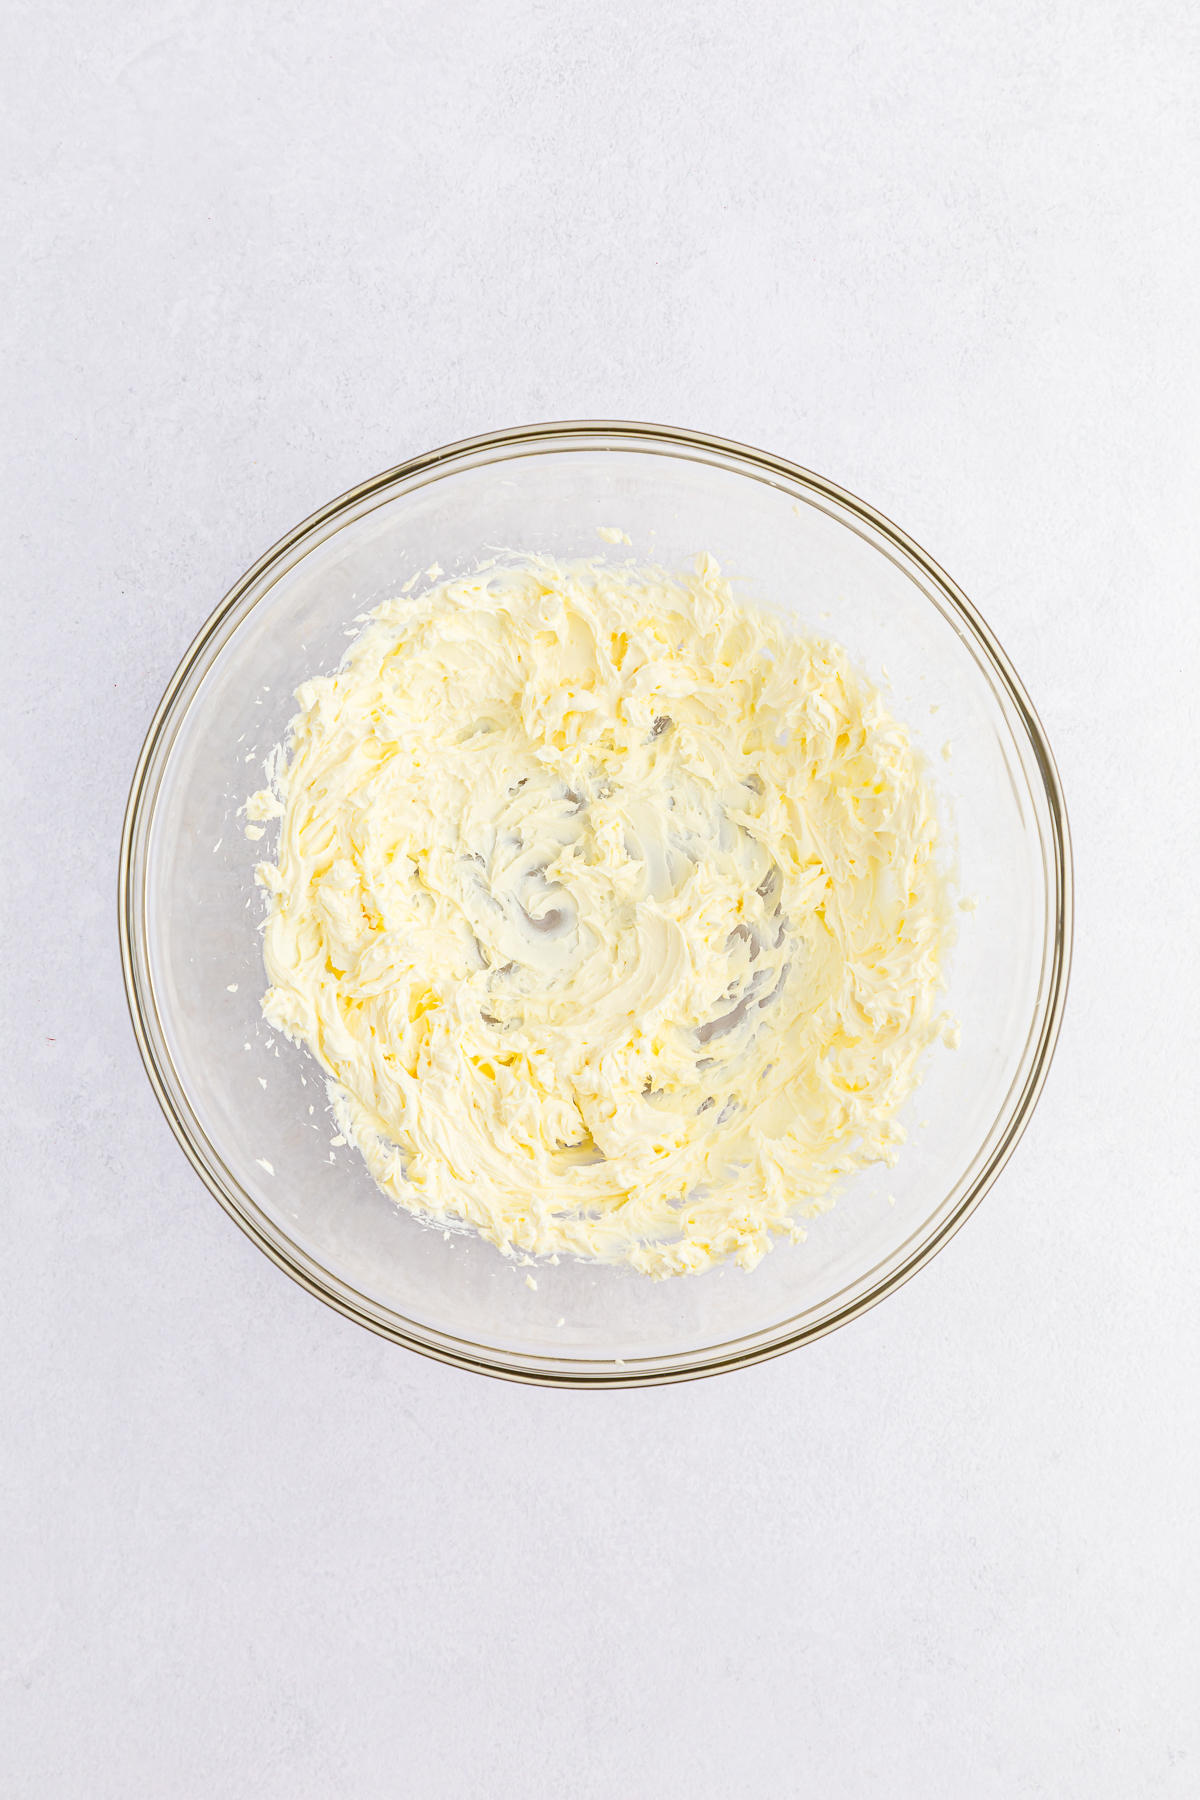 smooth cream cheese in a glass bowl